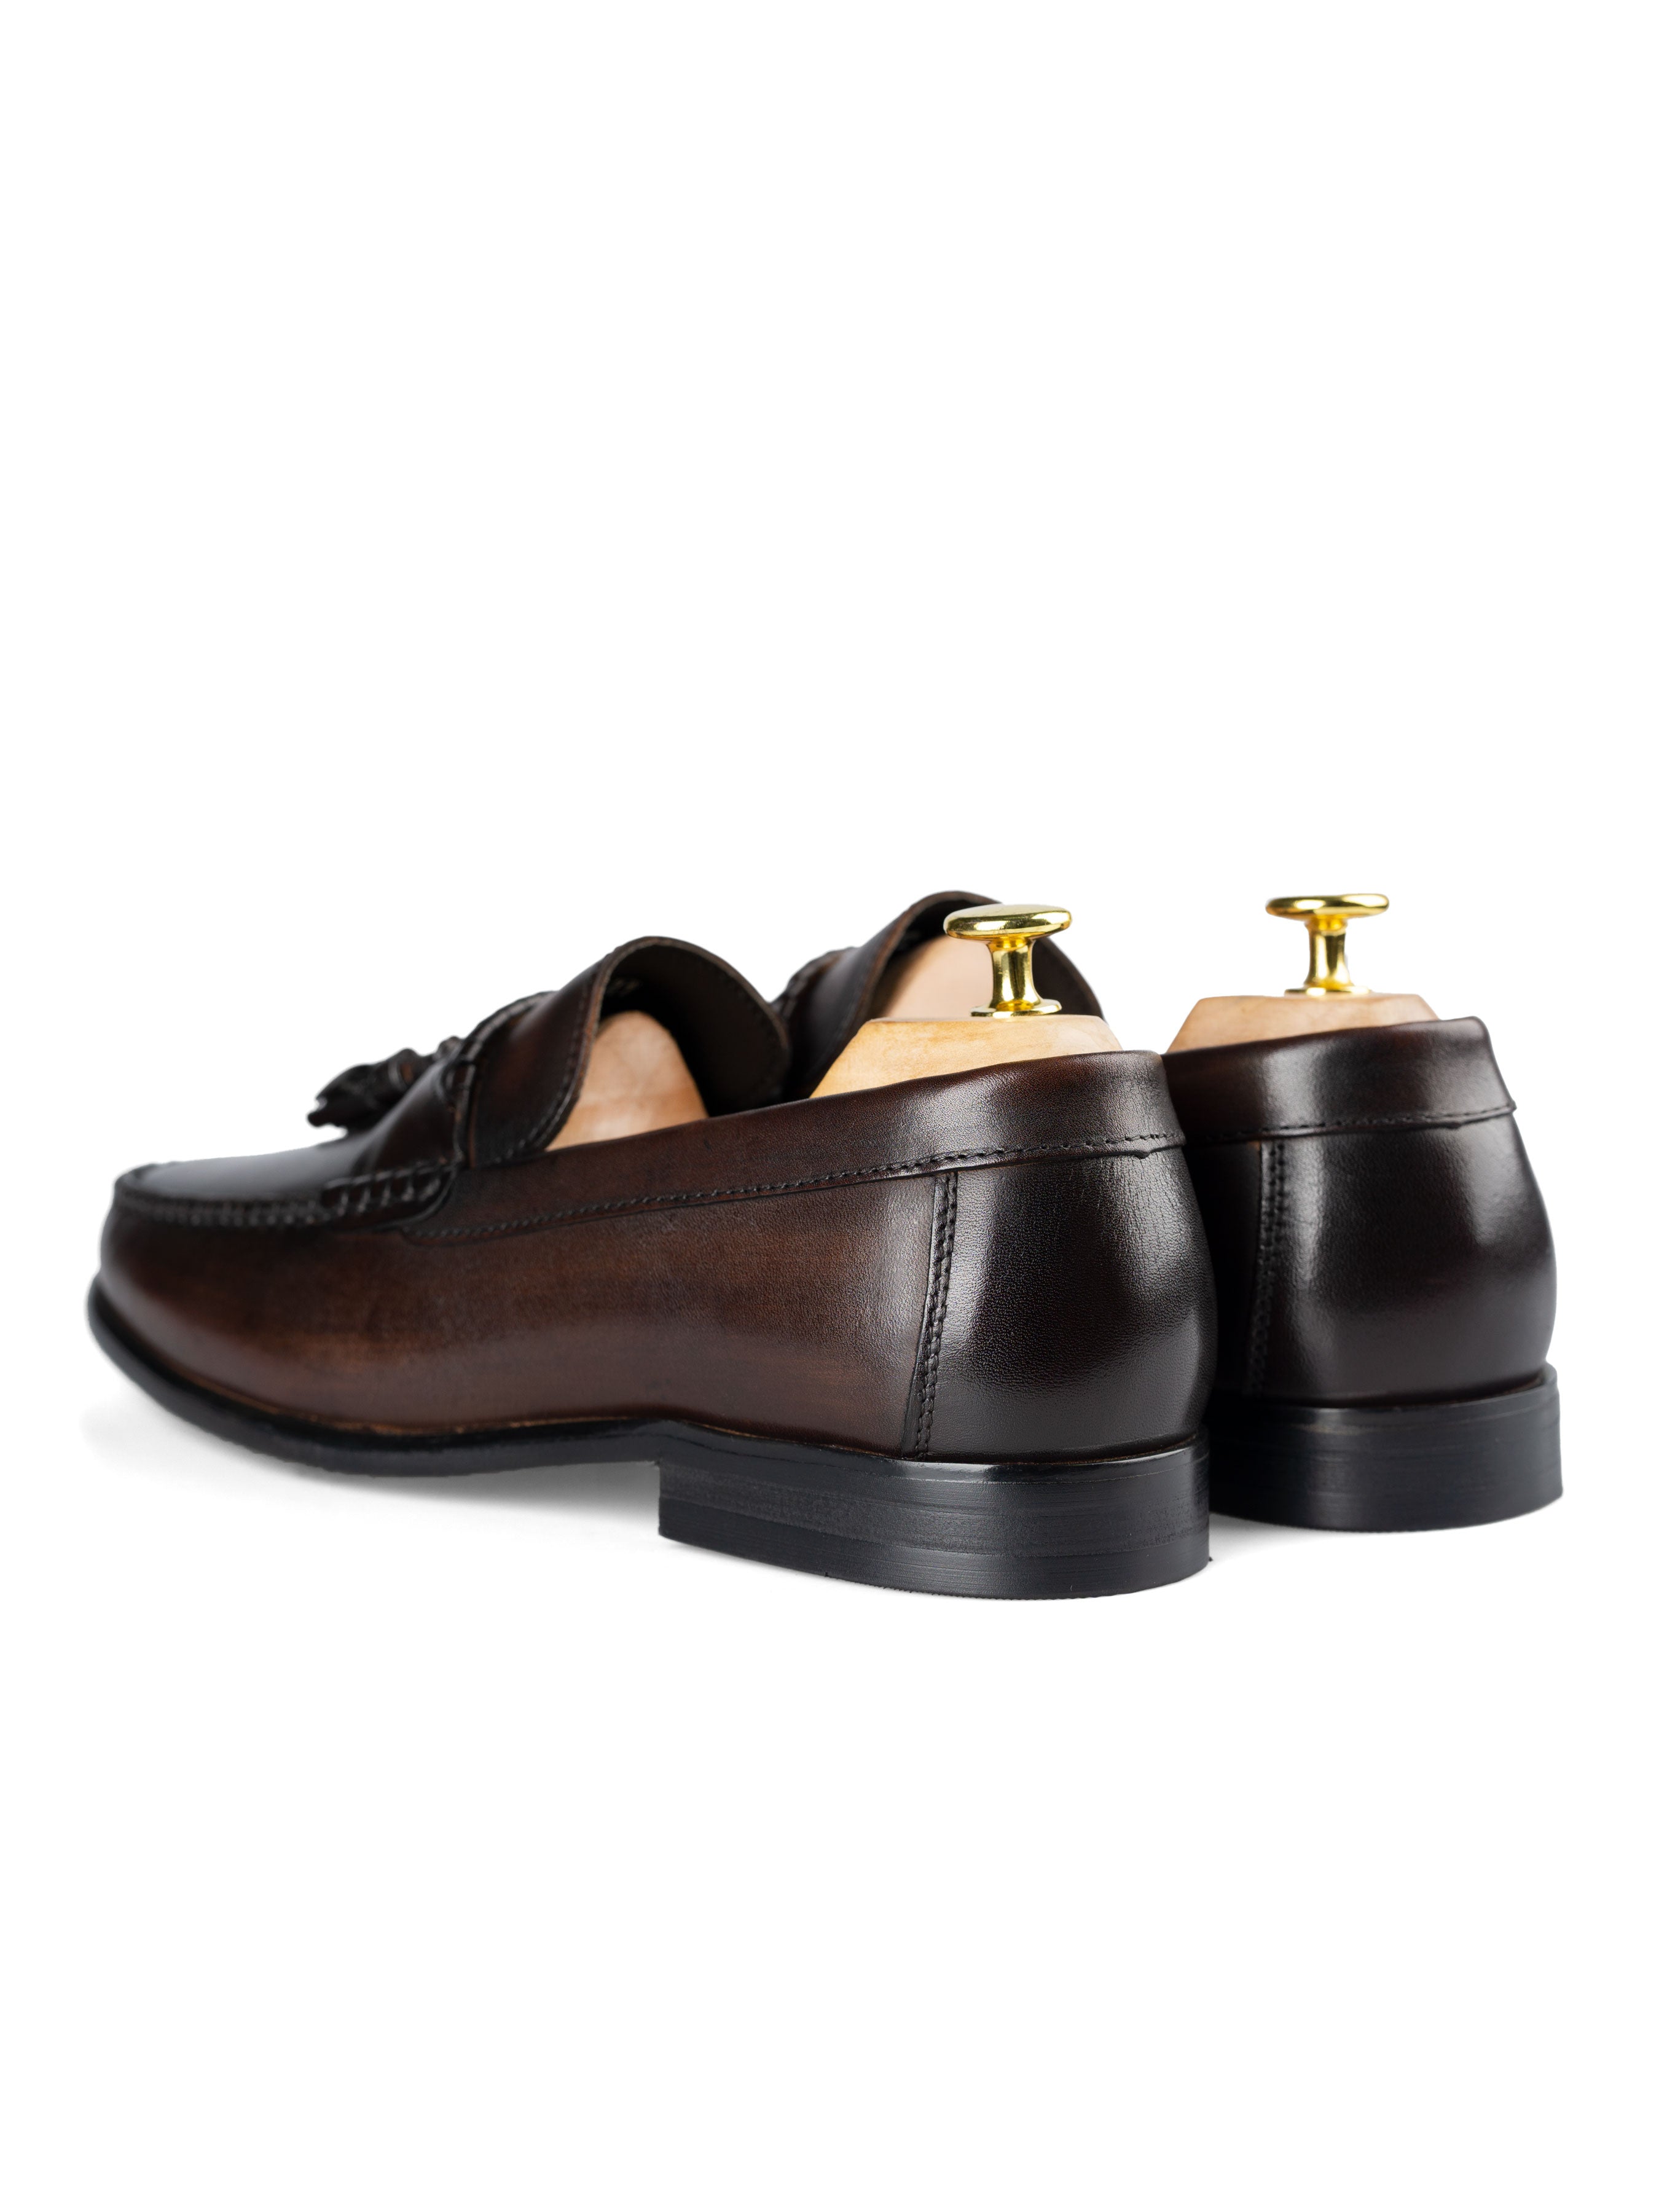 Tassel Moccasin Loafer - Dark Brown (Hand Painted Patina) - Zeve Shoes